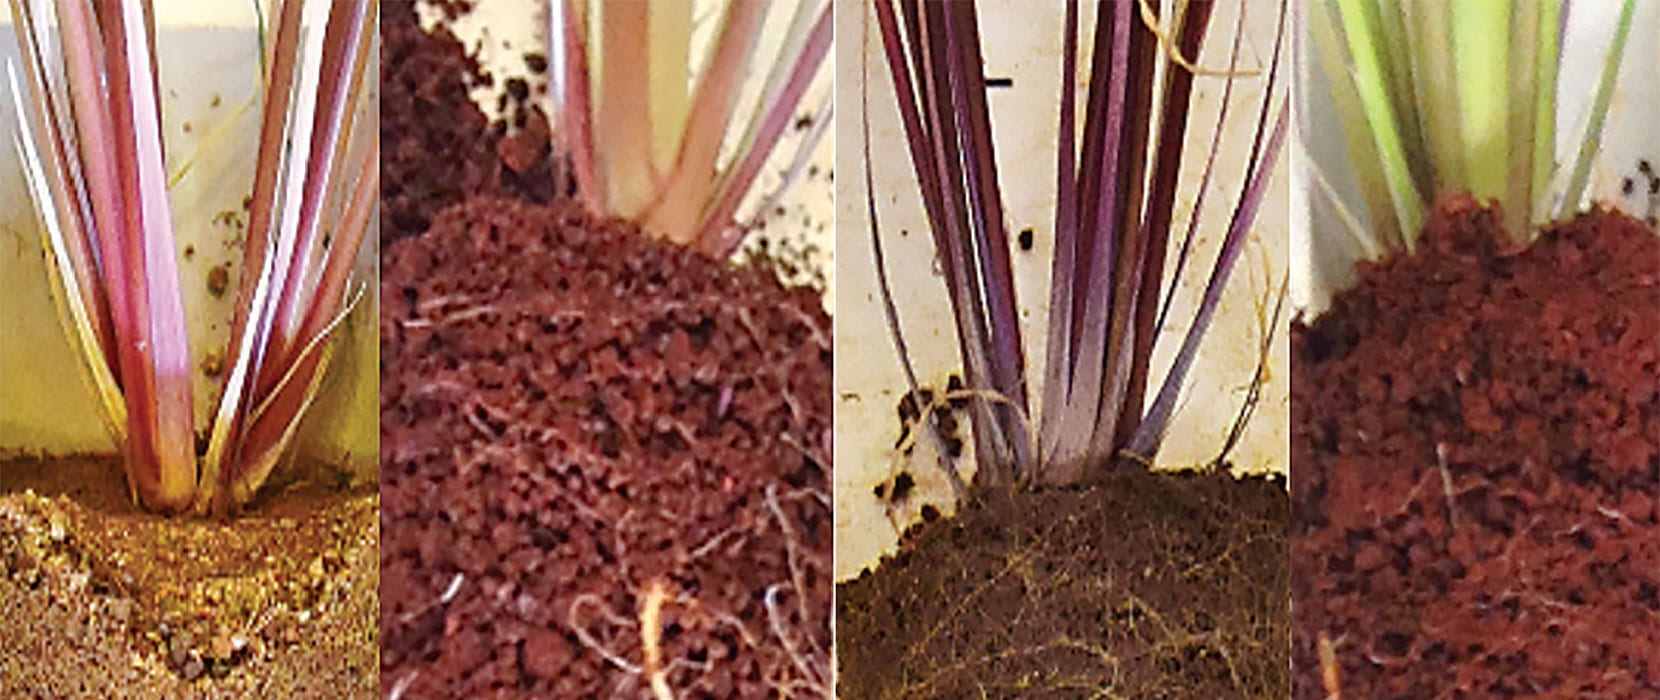 Cross-section of 4 grassy plants with roots penetrating the soil.